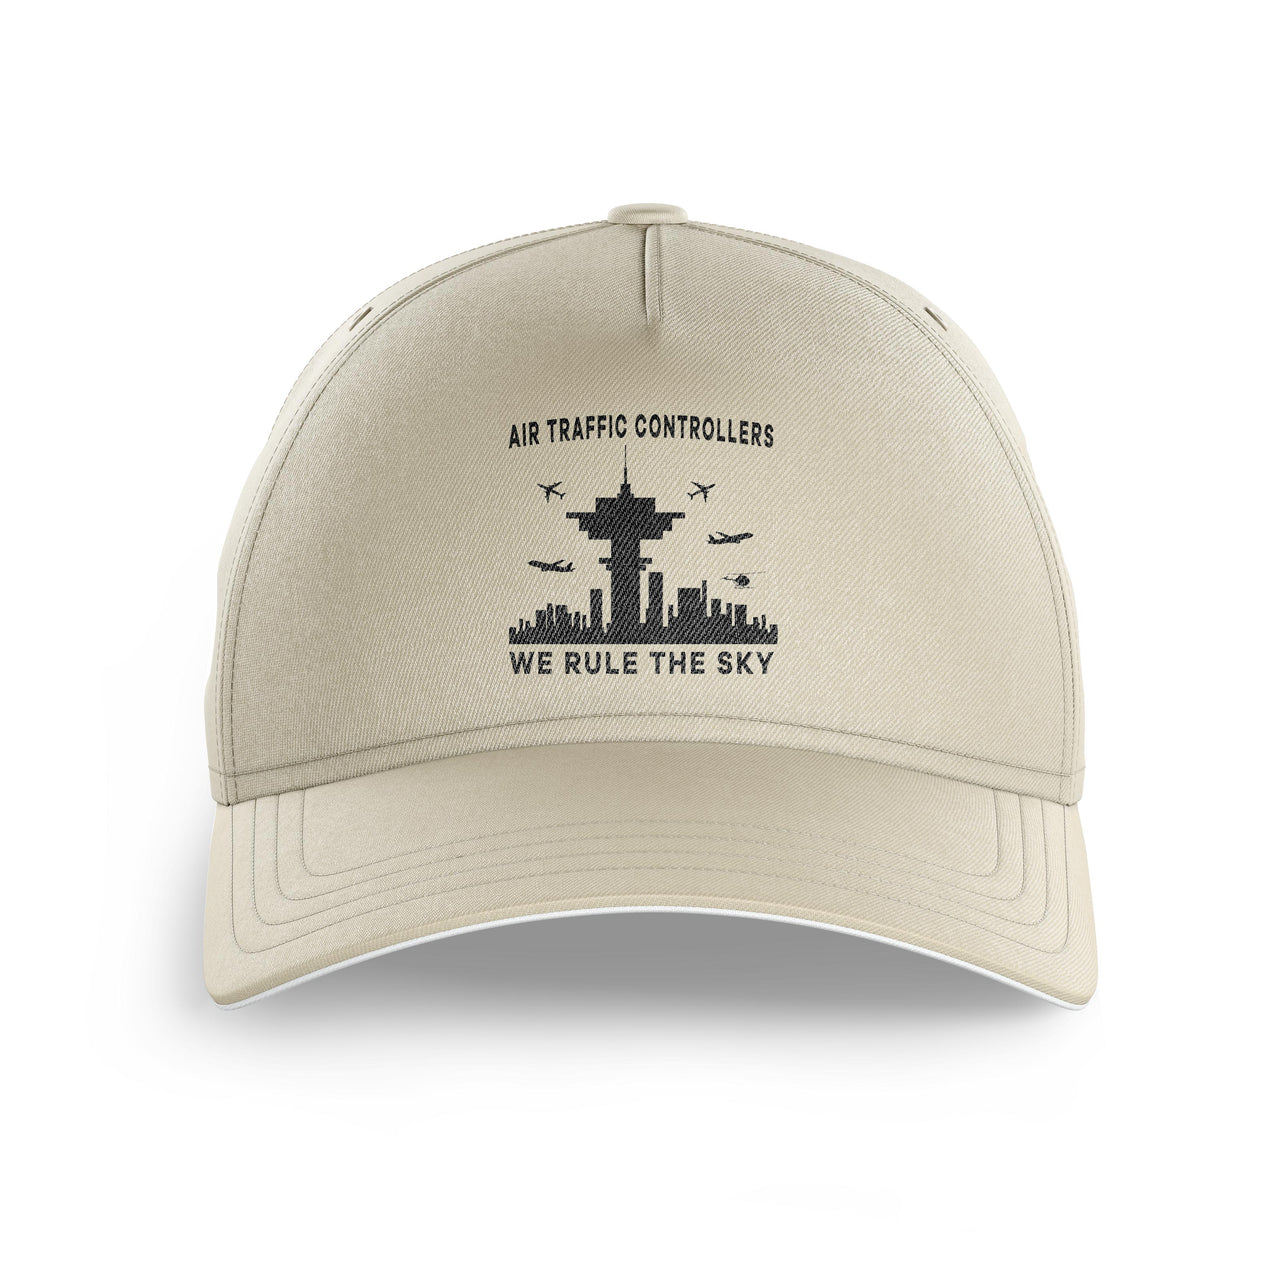 Air Traffic Controllers - We Rule The Sky Printed Hats